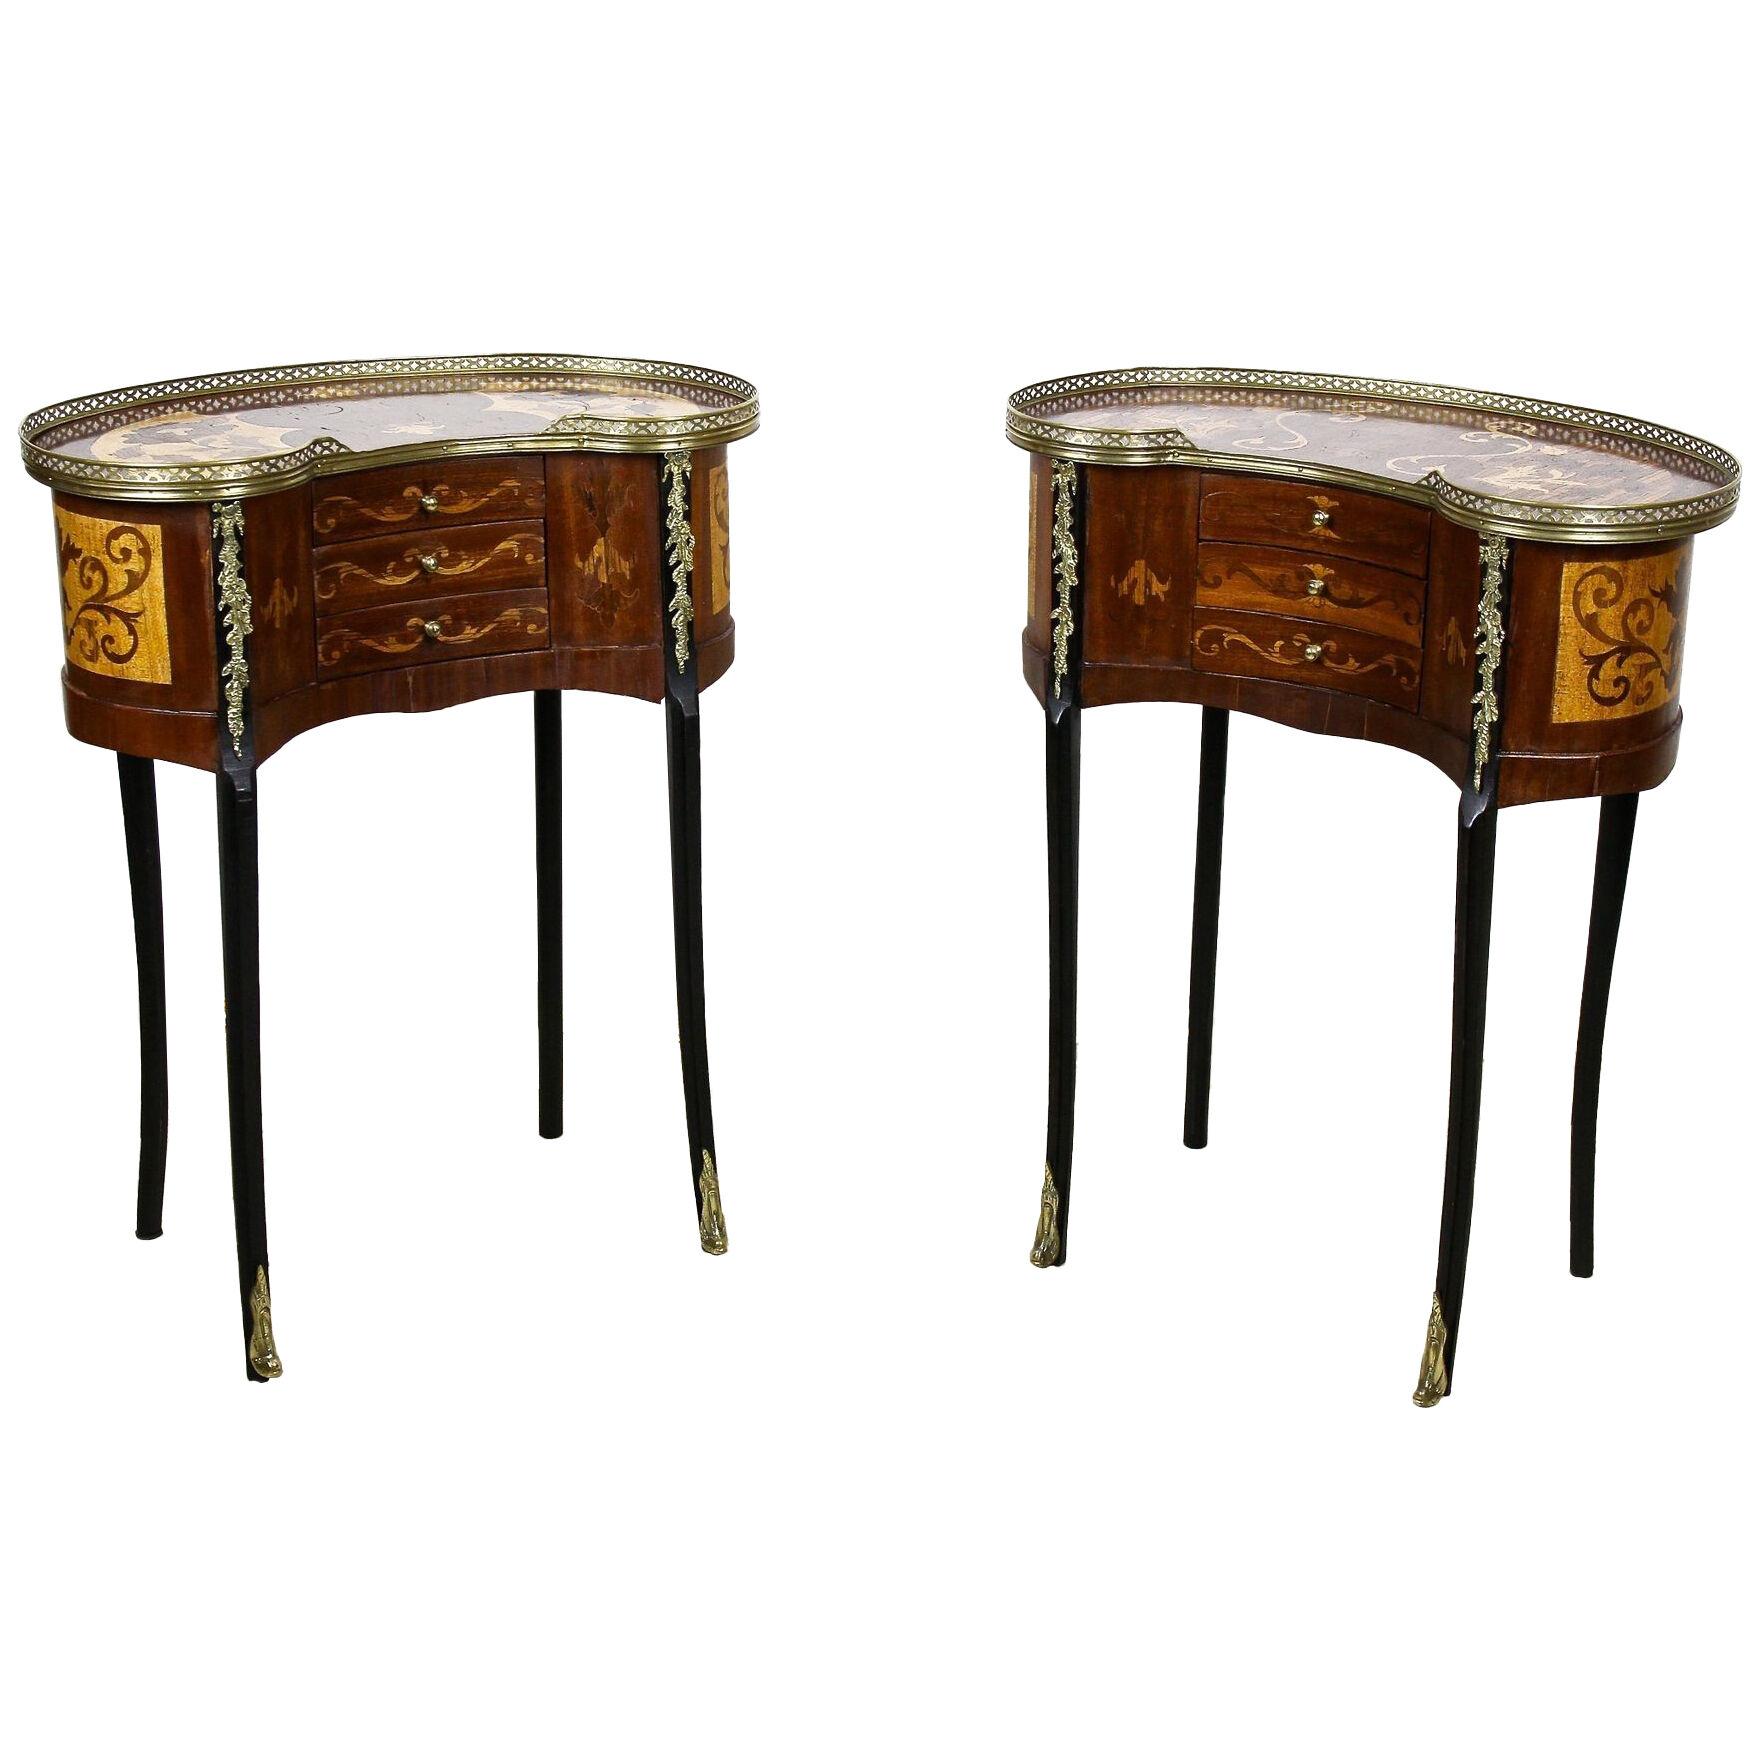 Pair Of 19th Century Marquetry Side Tables Louis XVI Style, France circa 1880